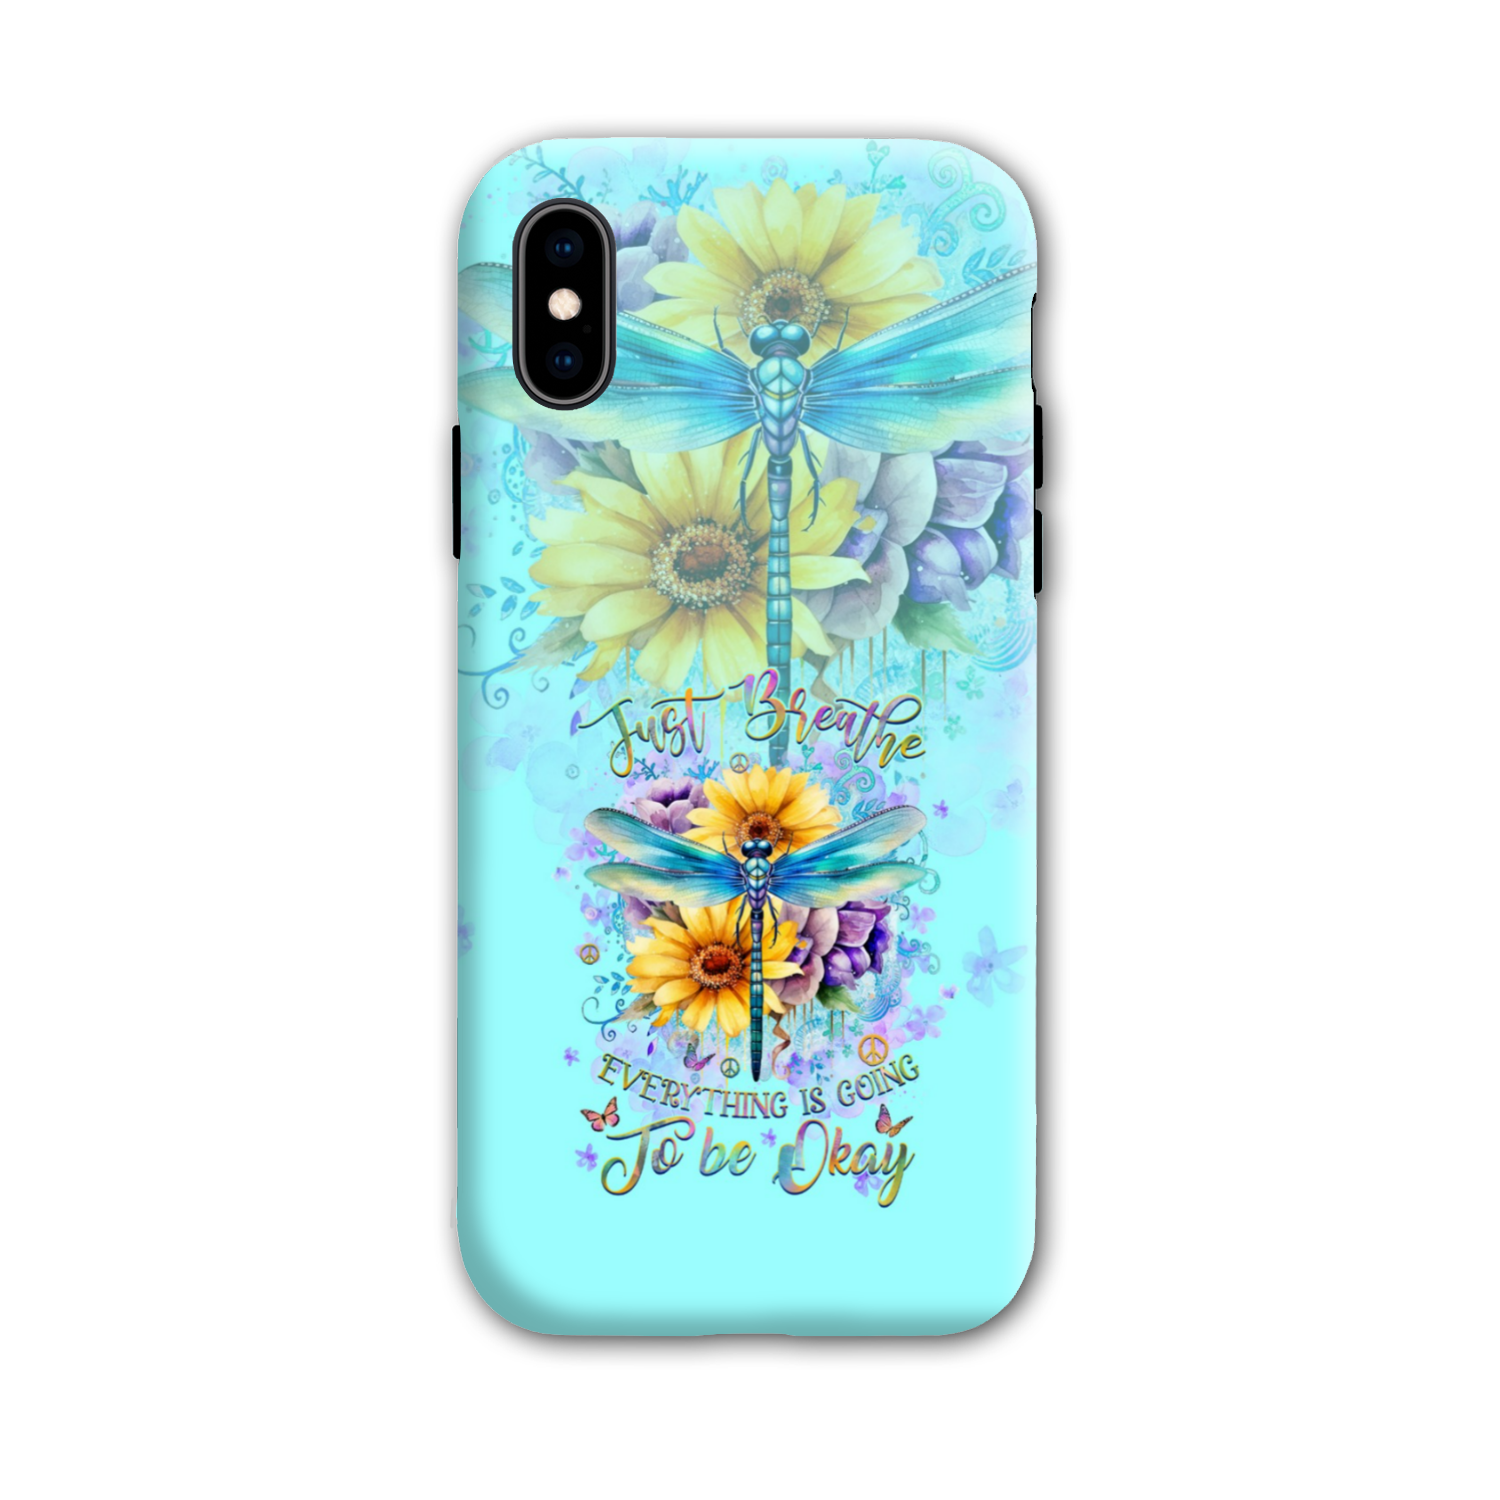 JUST BREATHE DRAGONFLY PHONE CASE - YH0210233